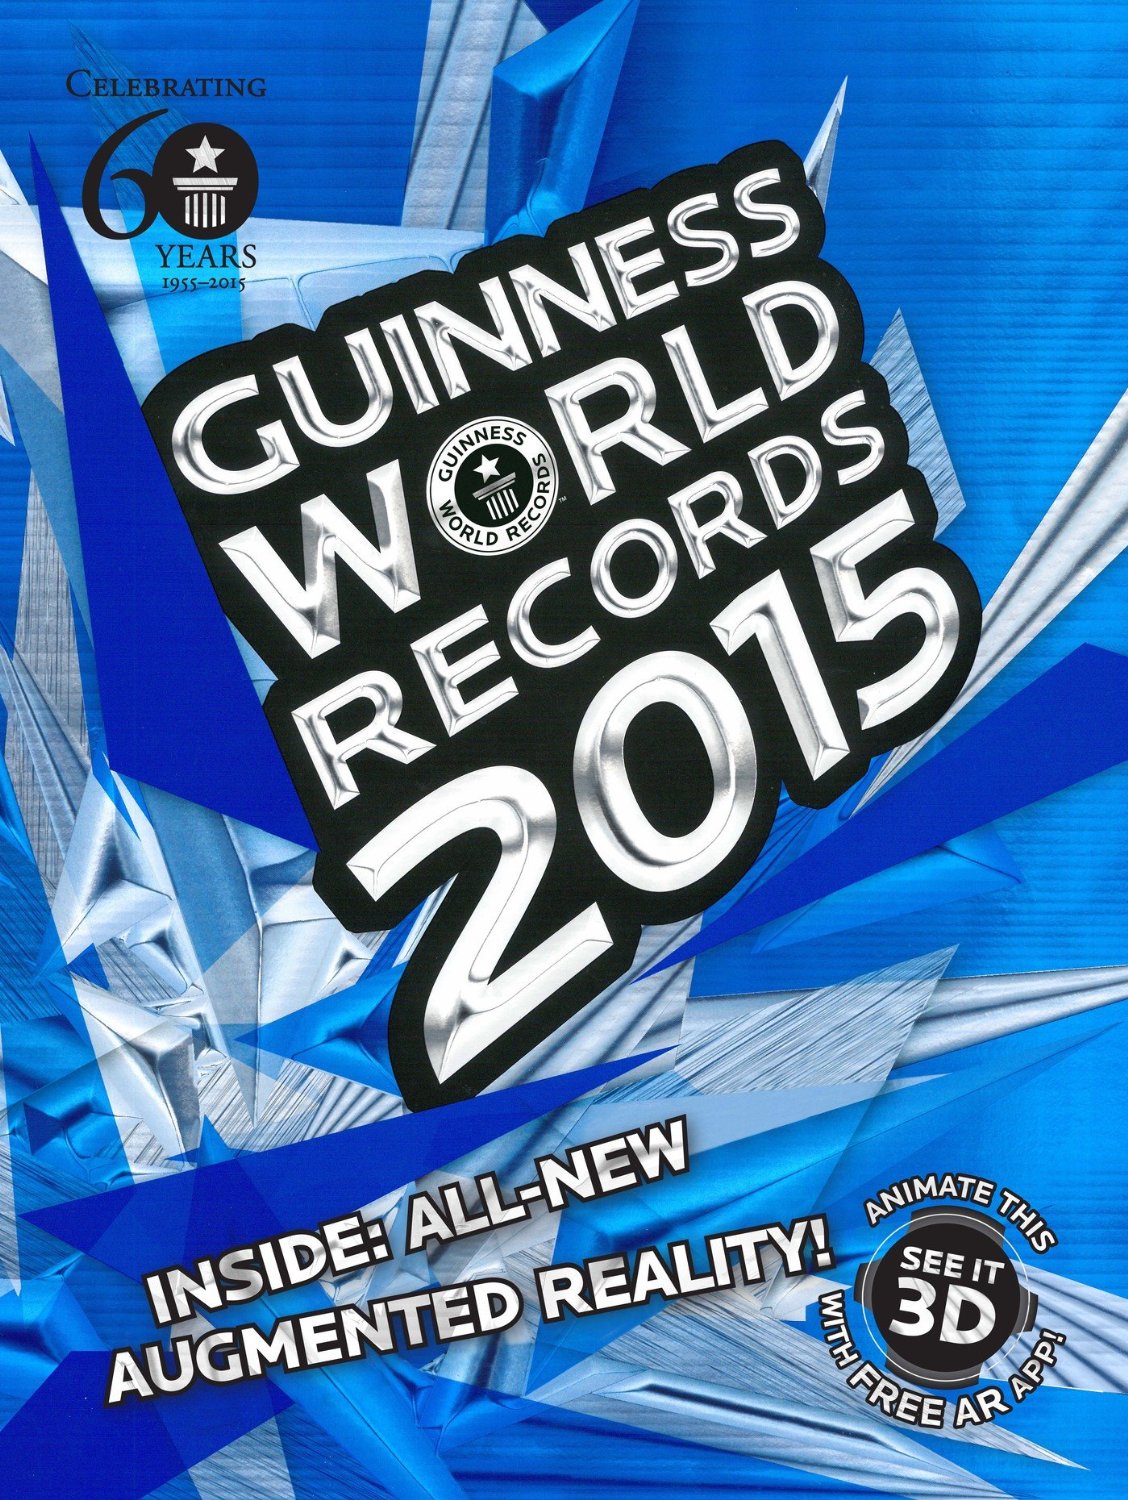 The Guinness Book of Records holds the record for being the book most 

often stolen from public libraries.